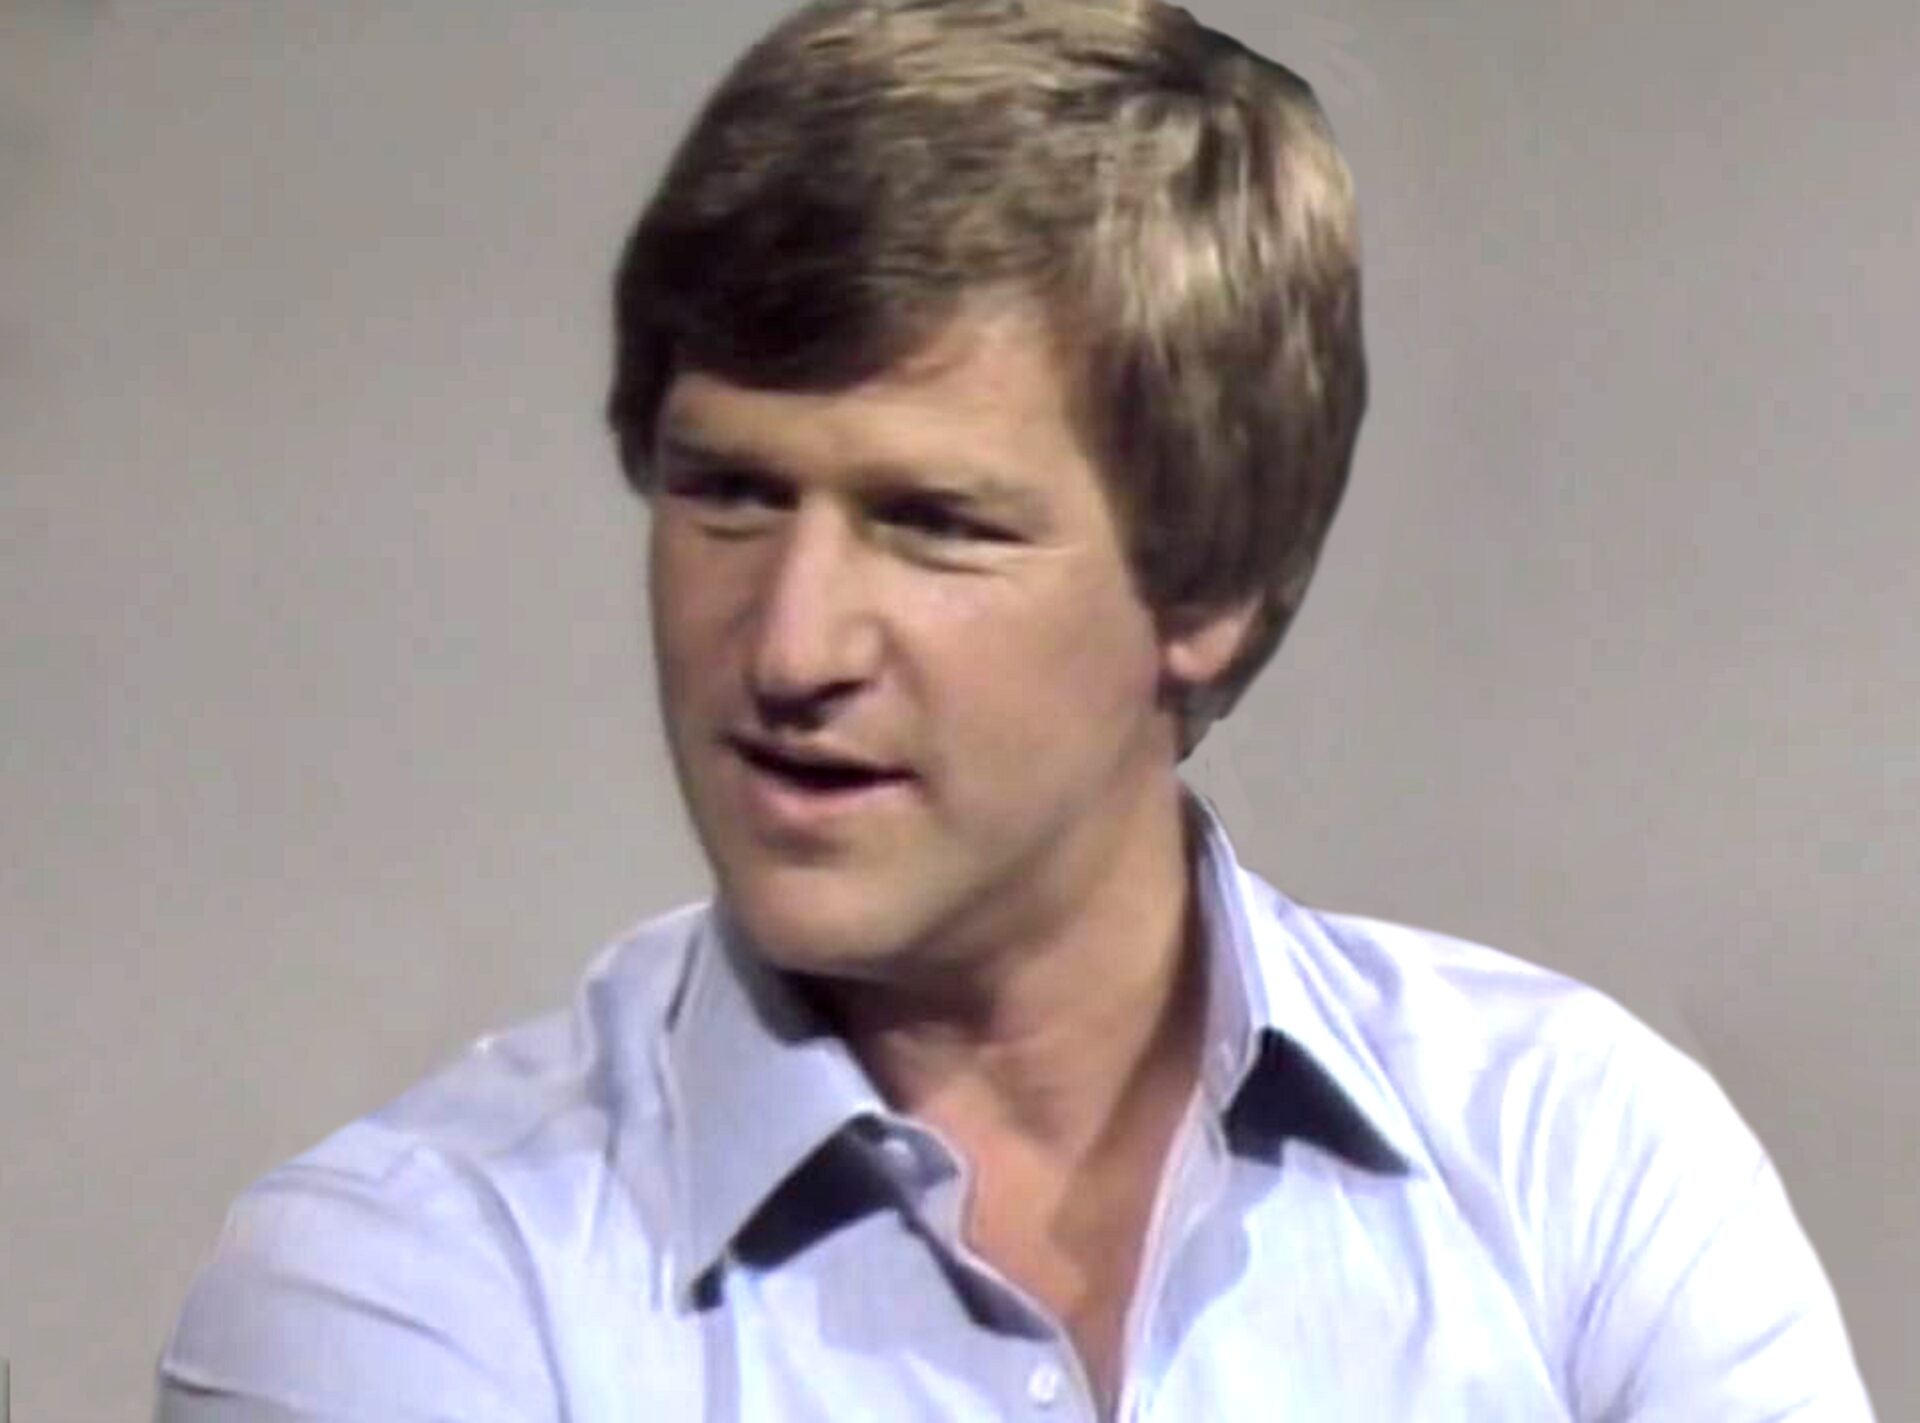 This Day In Hockey History-May 21, 1990-Bobby Orr’s next project may be NHL team